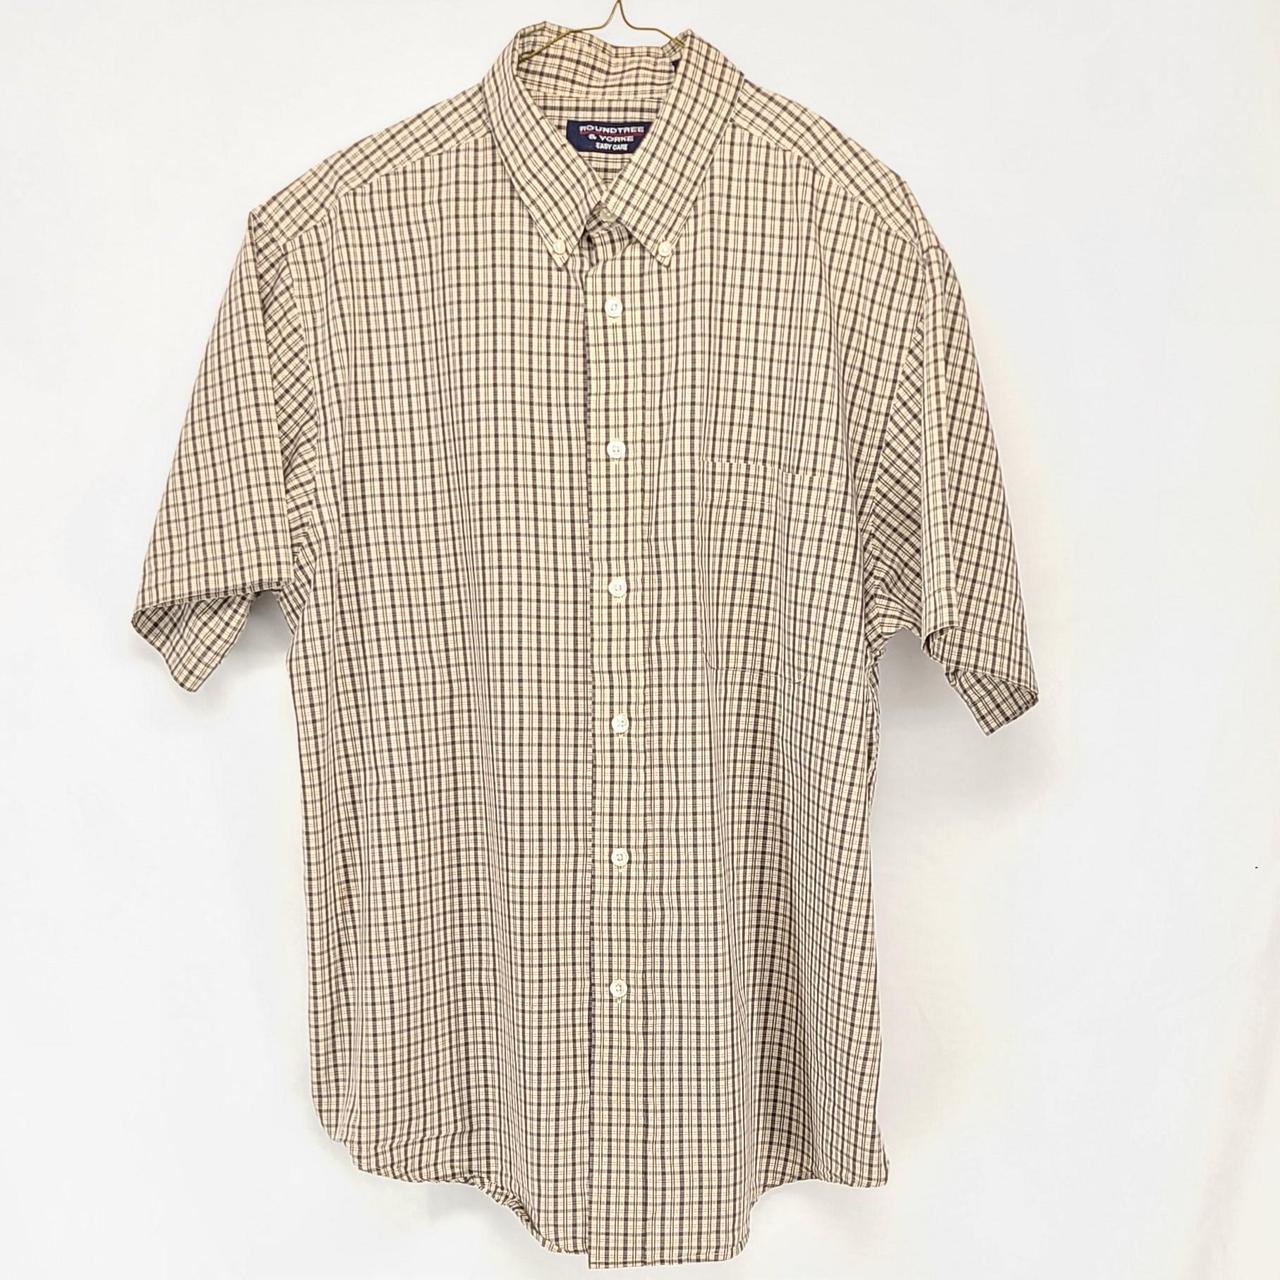 ROUNDTREE & YORKE EASY CARE VINTAGE BUTTON SHIRT, I - Depop